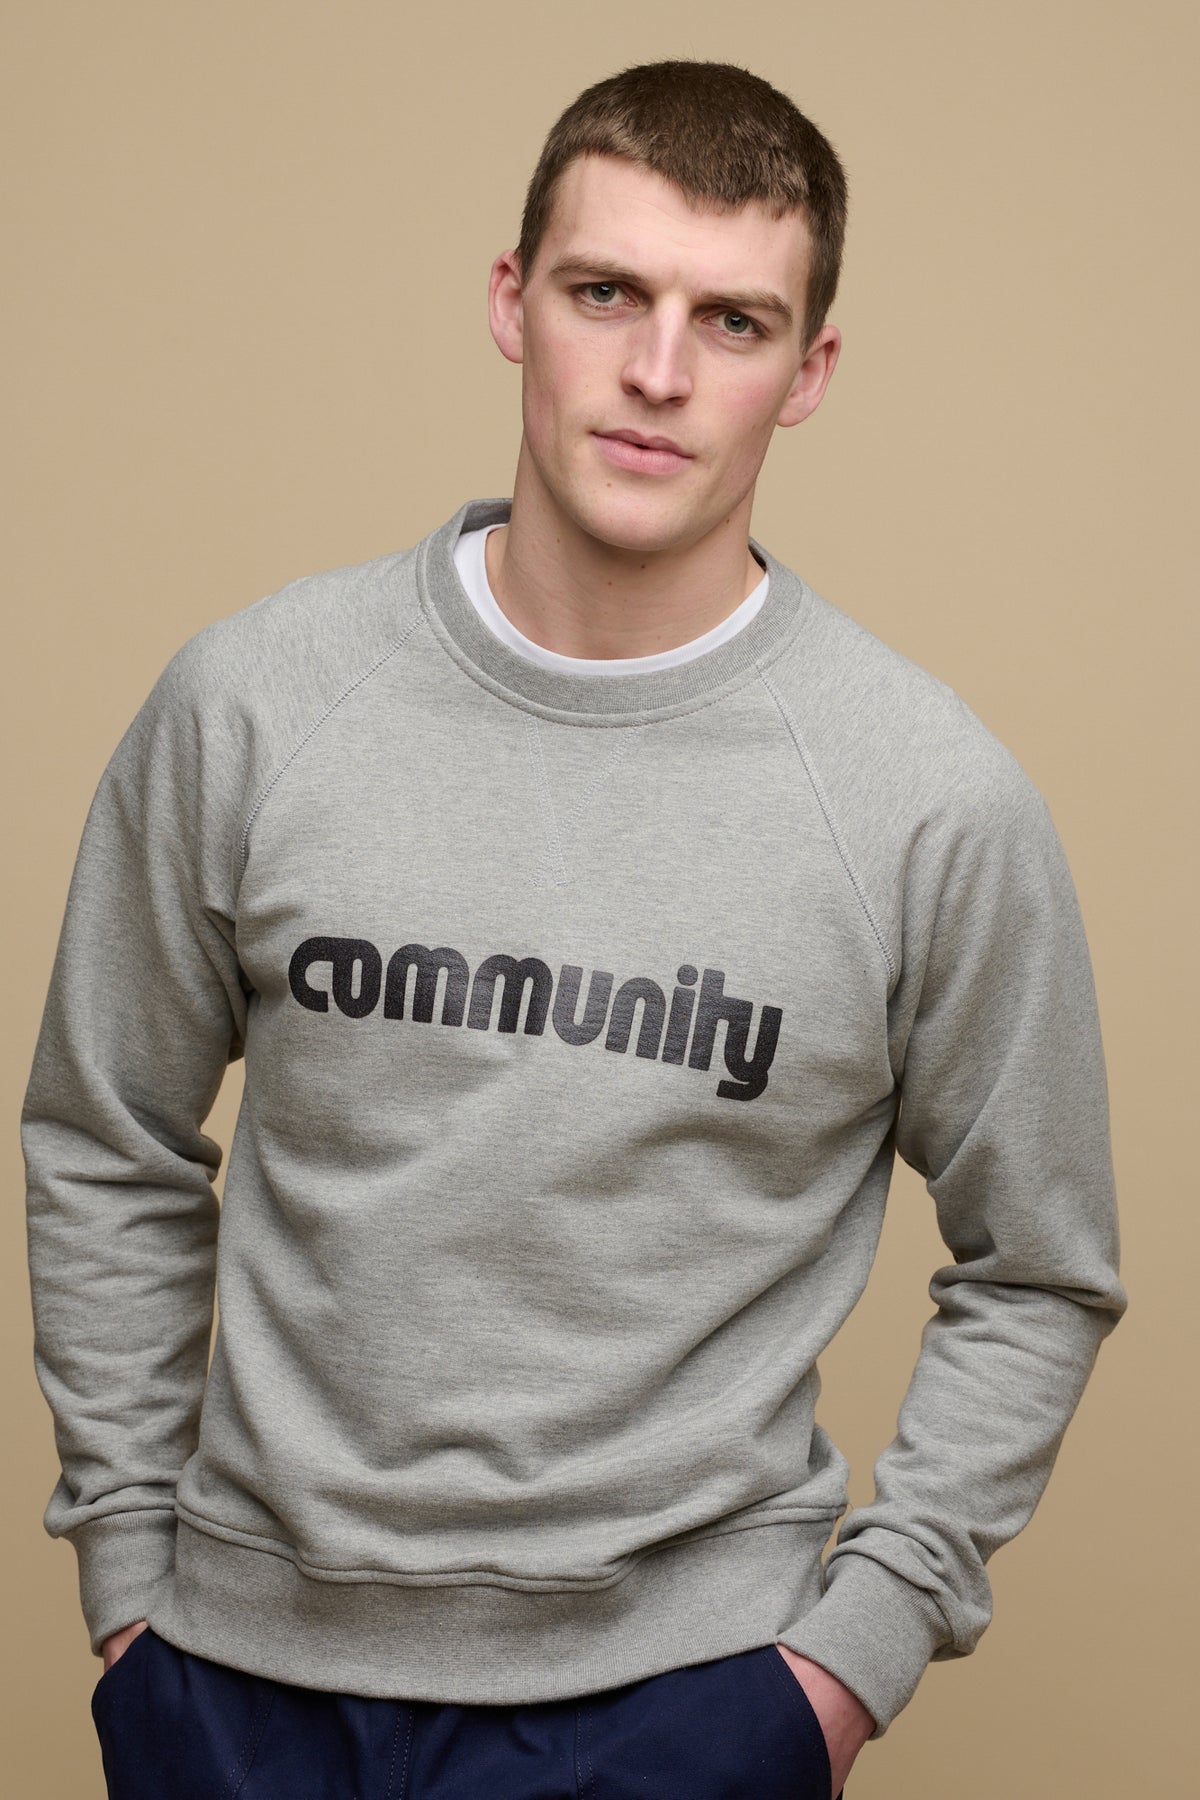 
            Front of brunet male wearing logo raglan sweatshirt in grey marl with Community logo across the chest, crew neck t shirt in white visible worn underneath.